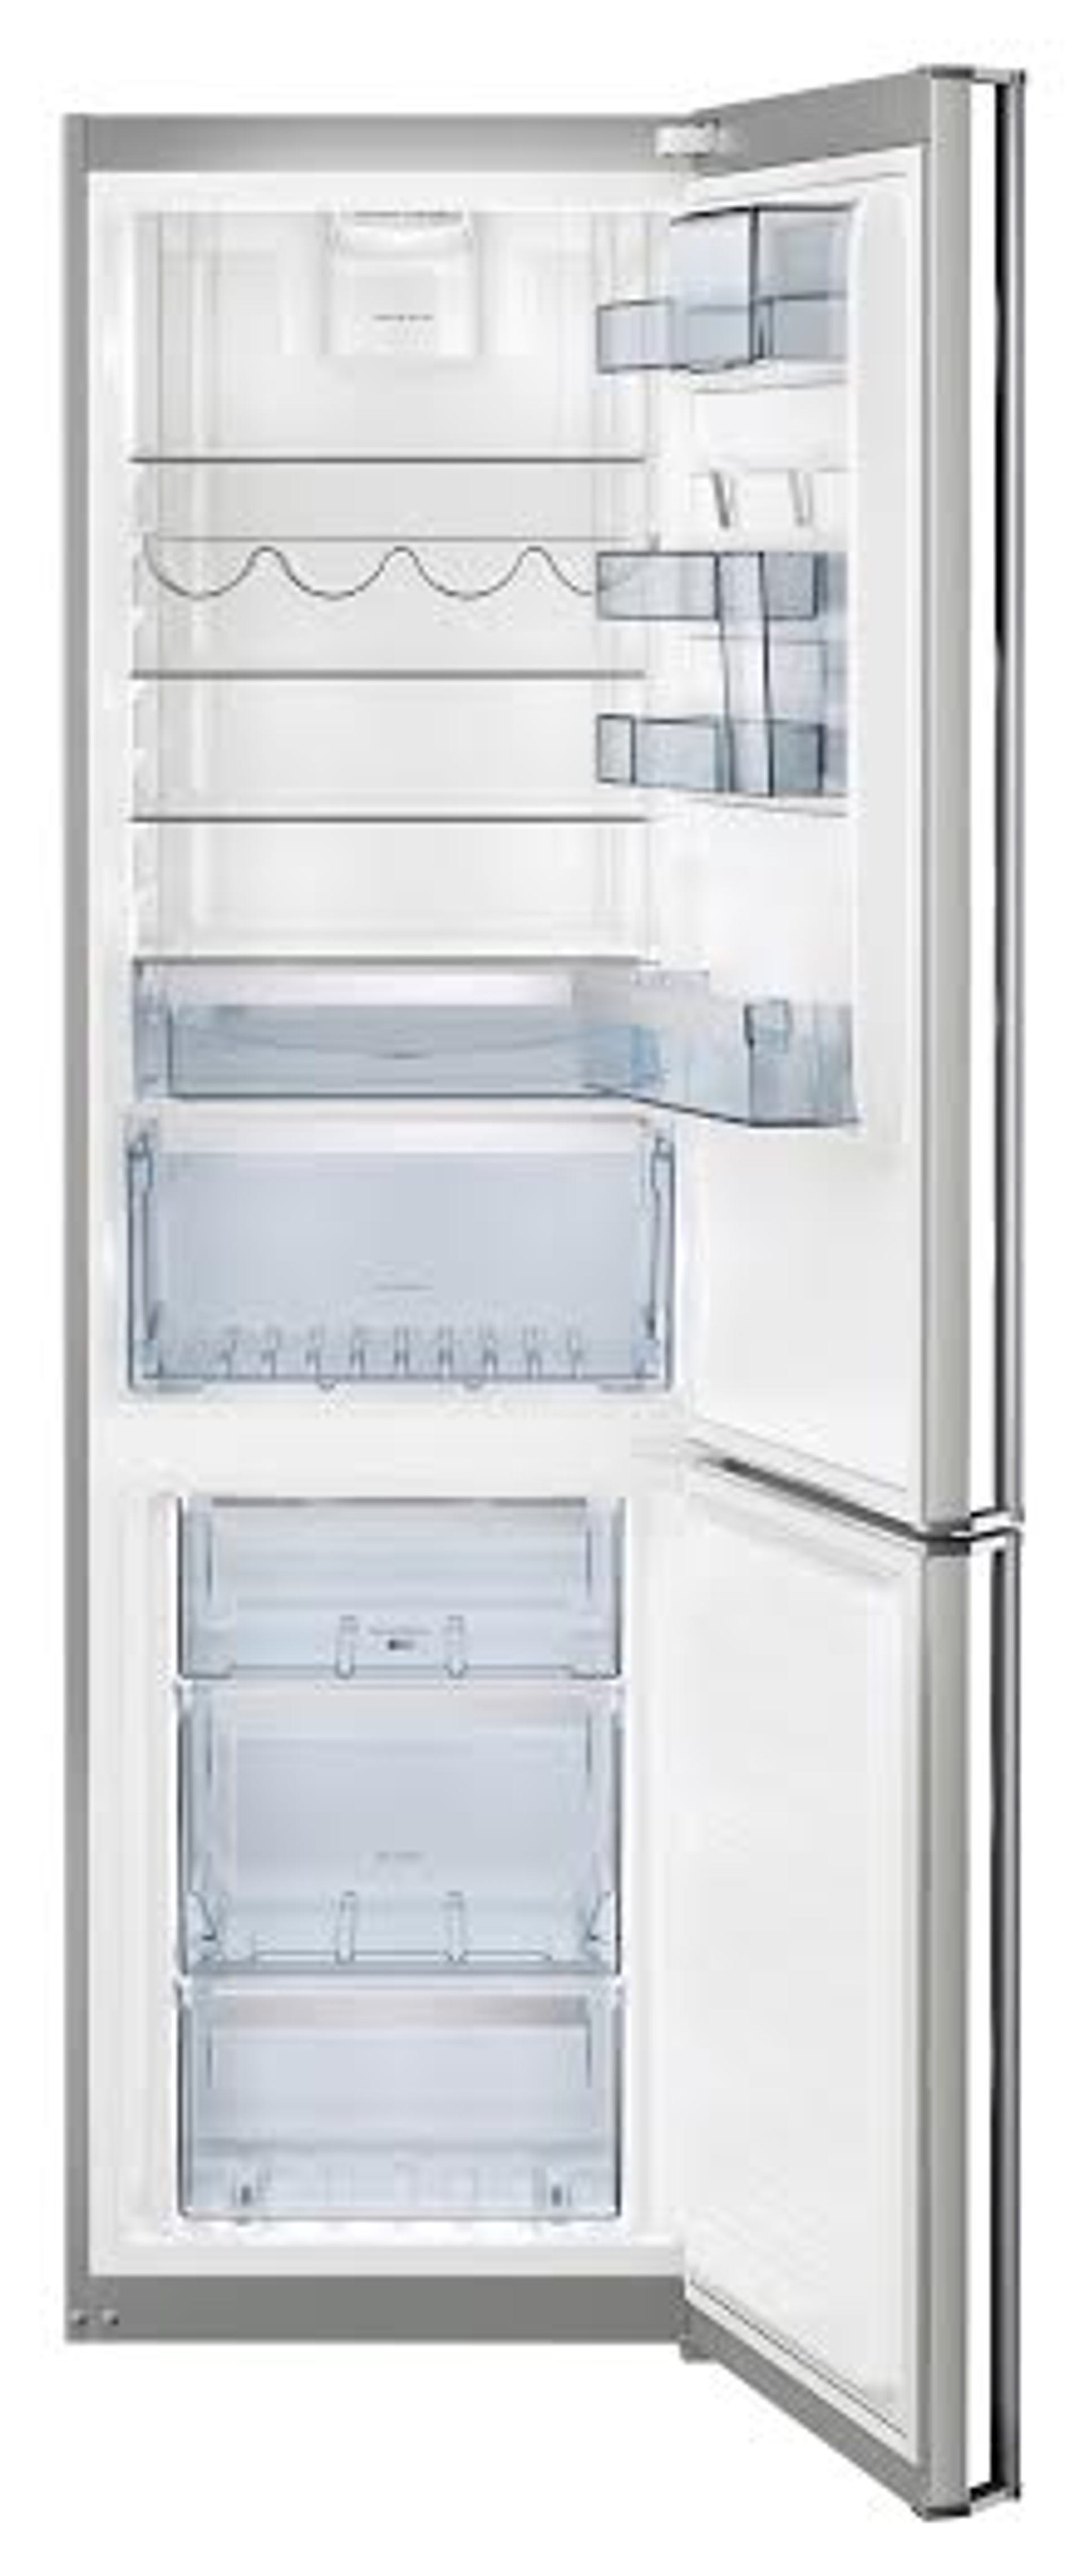 The new AEG matching fridge and freezer offers a more spacious alternative  to…